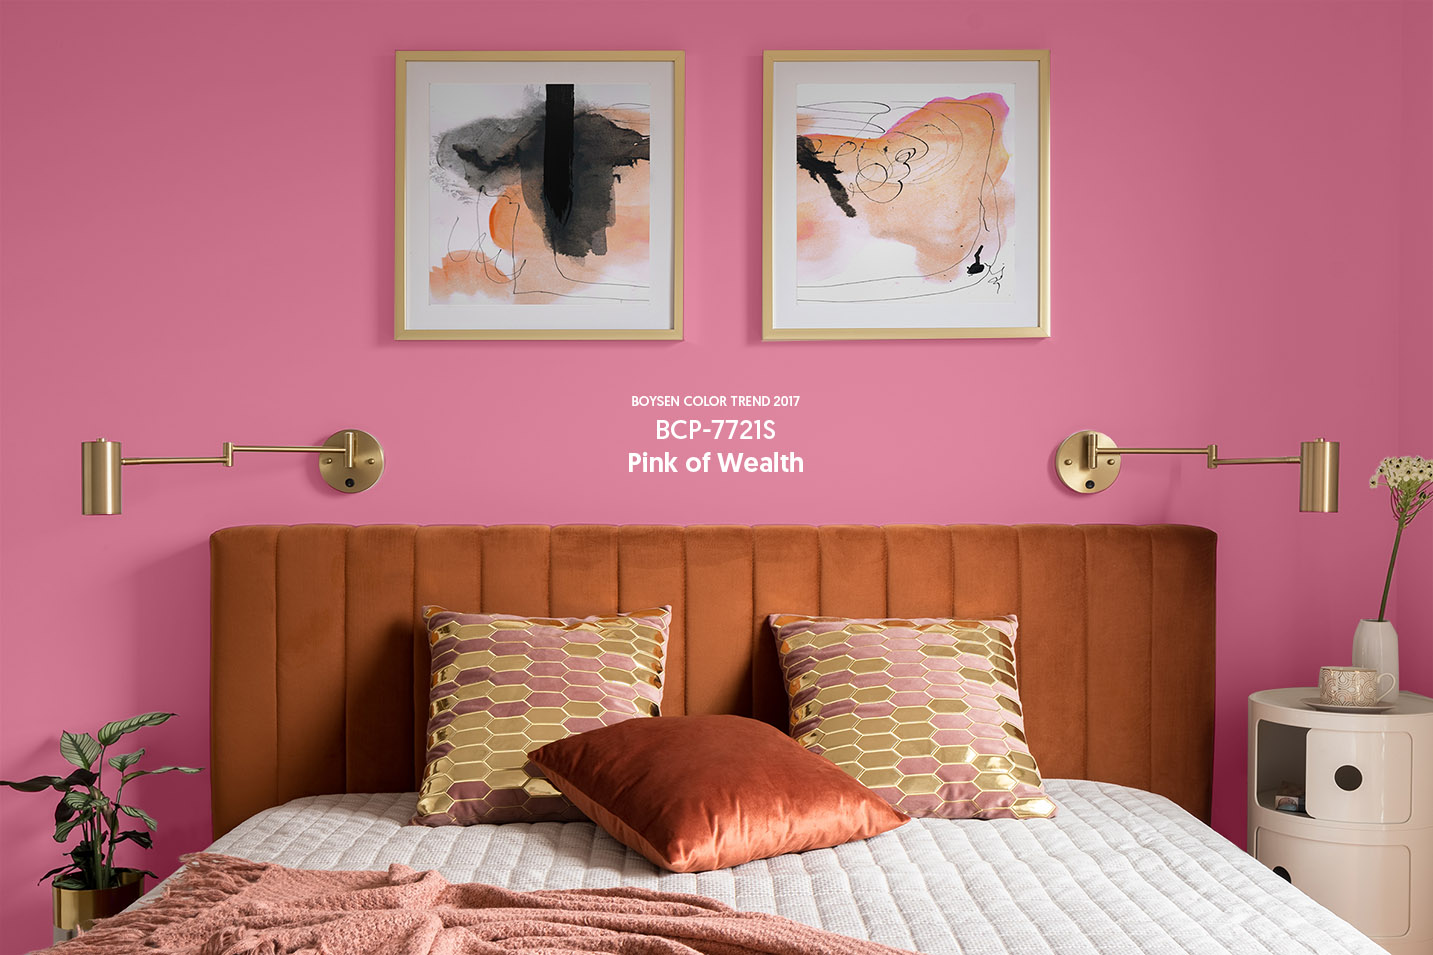 Boysen Pinks to Make Your Doll House Dreams Come True | MyBoysen